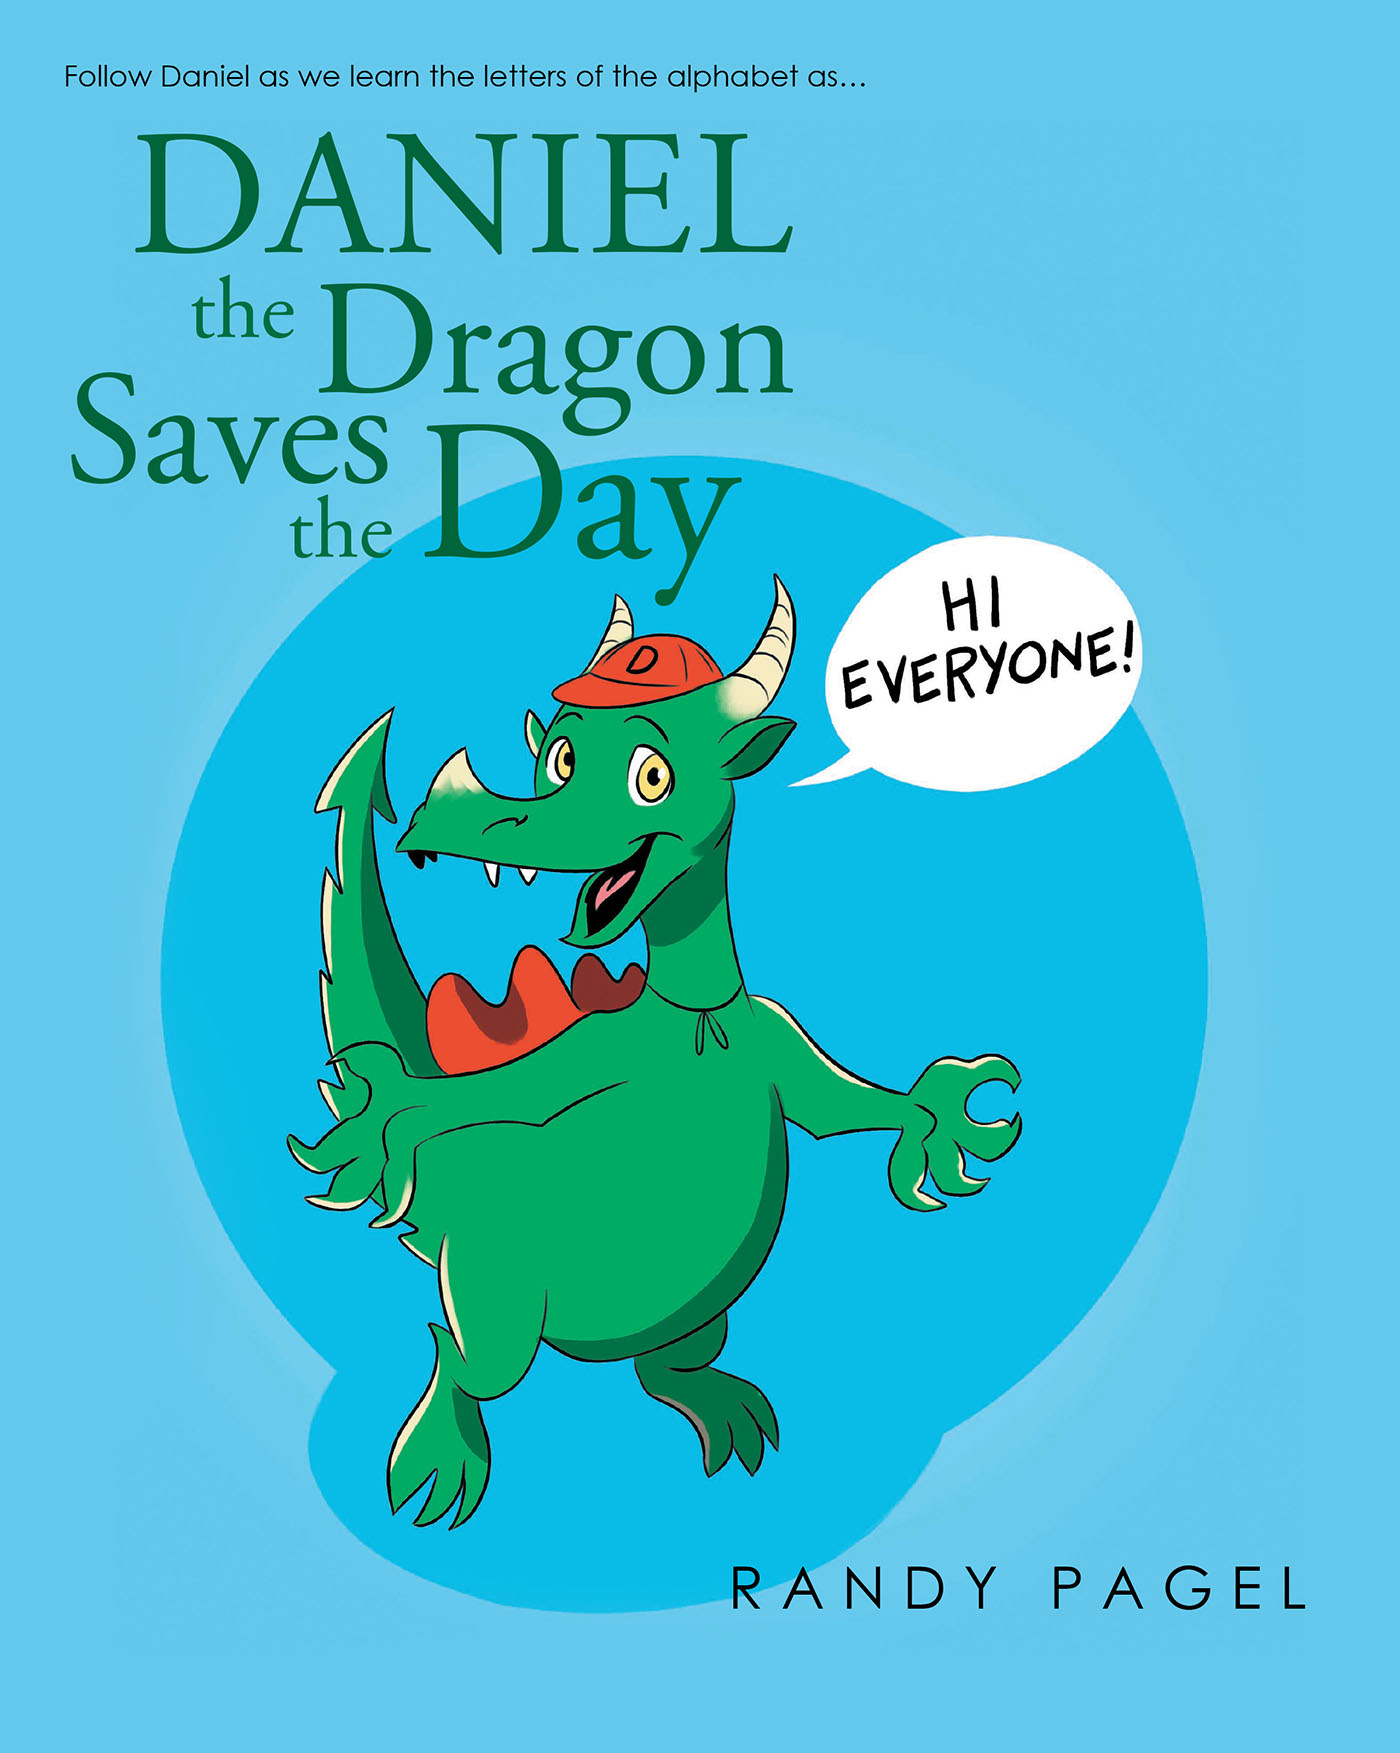 Author Randy Pagel’s New Book, "Daniel the Dragon Saves the Day," is an Engaging Story That Was Written to Help Young Children Learn the Alphabet